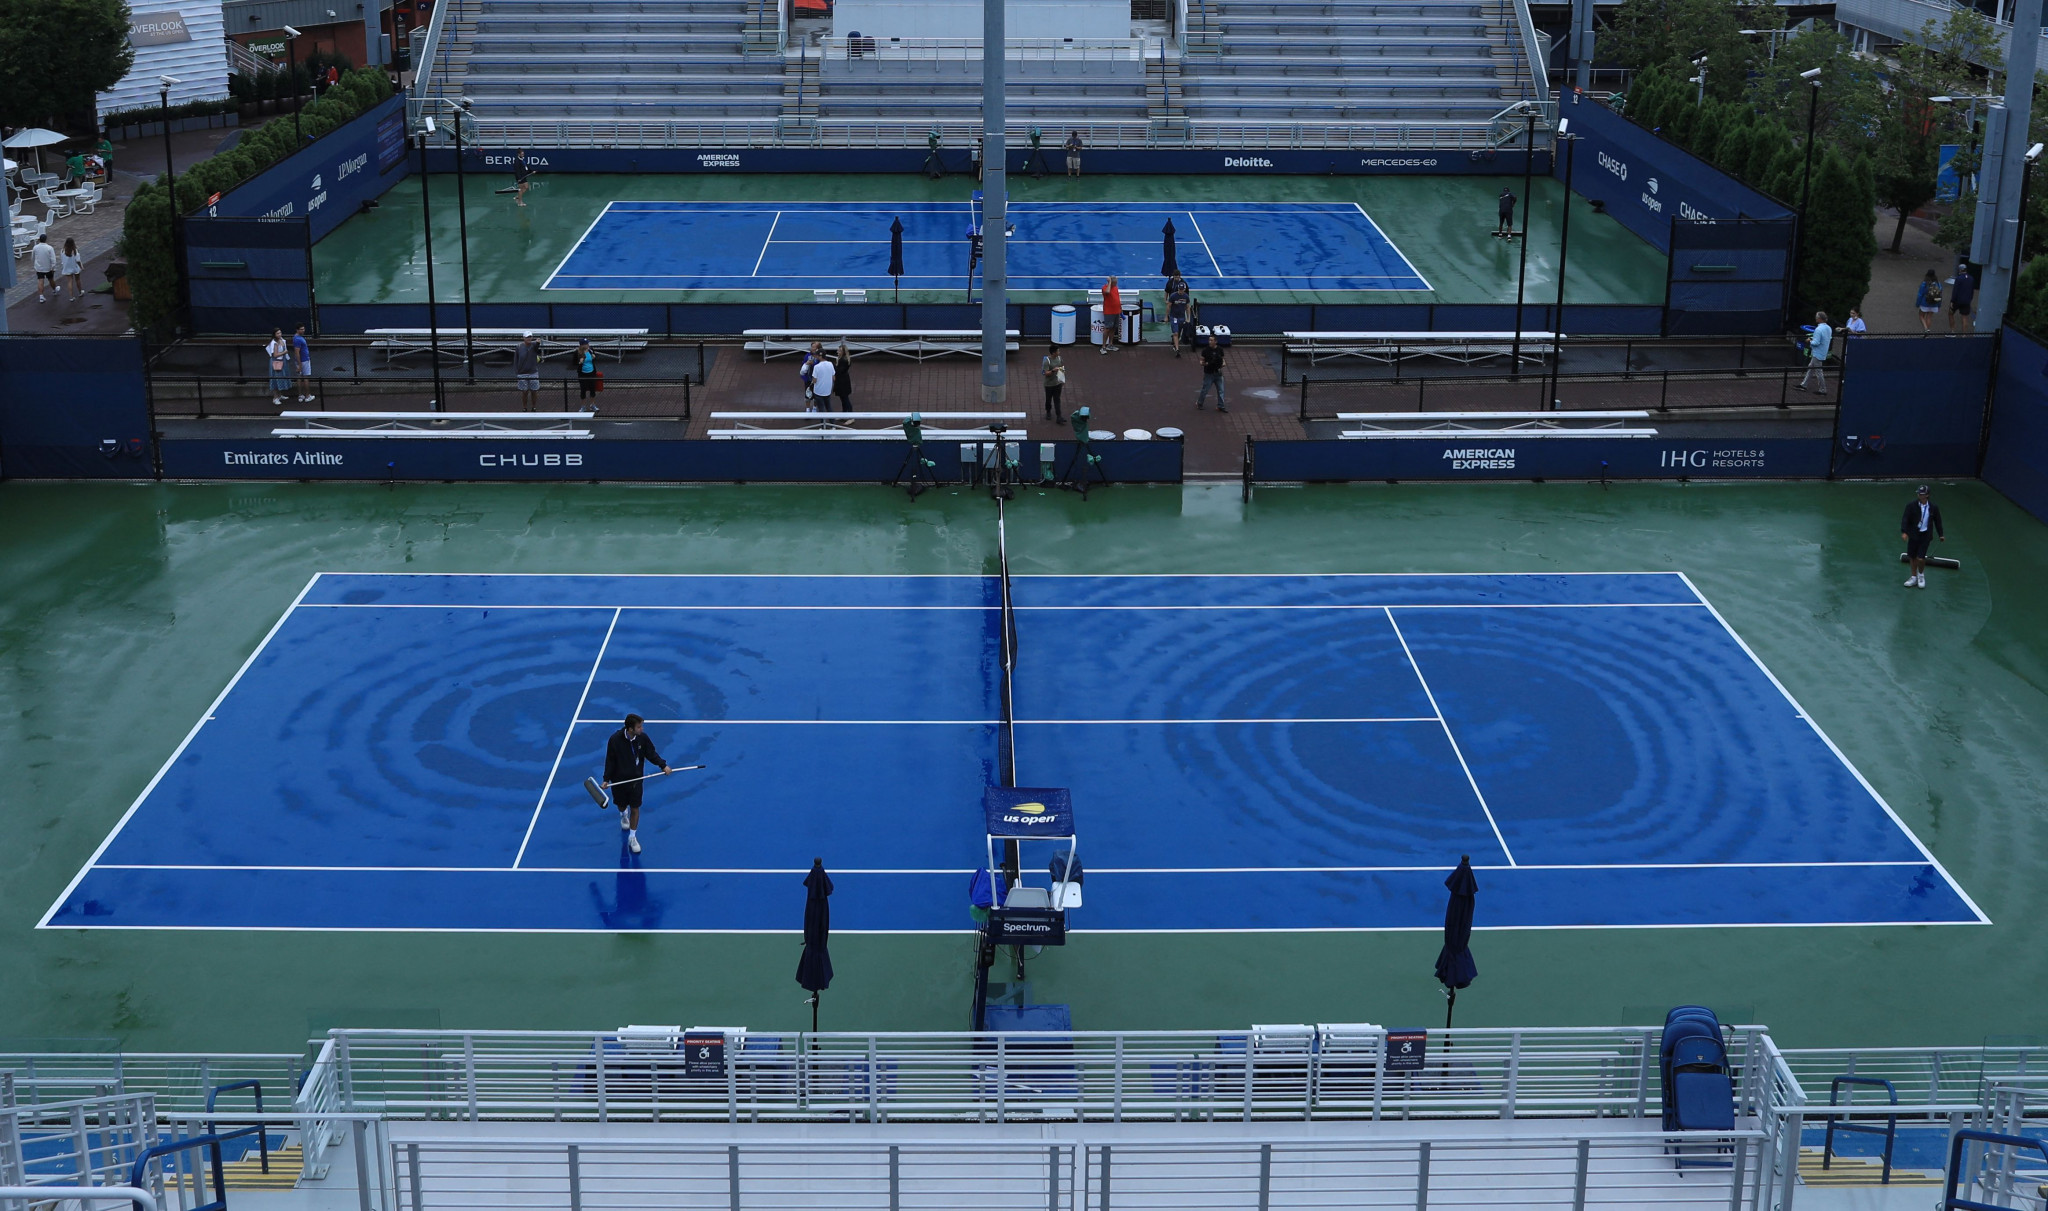 The Billie Jean King National Tennis Center has emerged from Storm Ida largely unscathed ©Getty Images